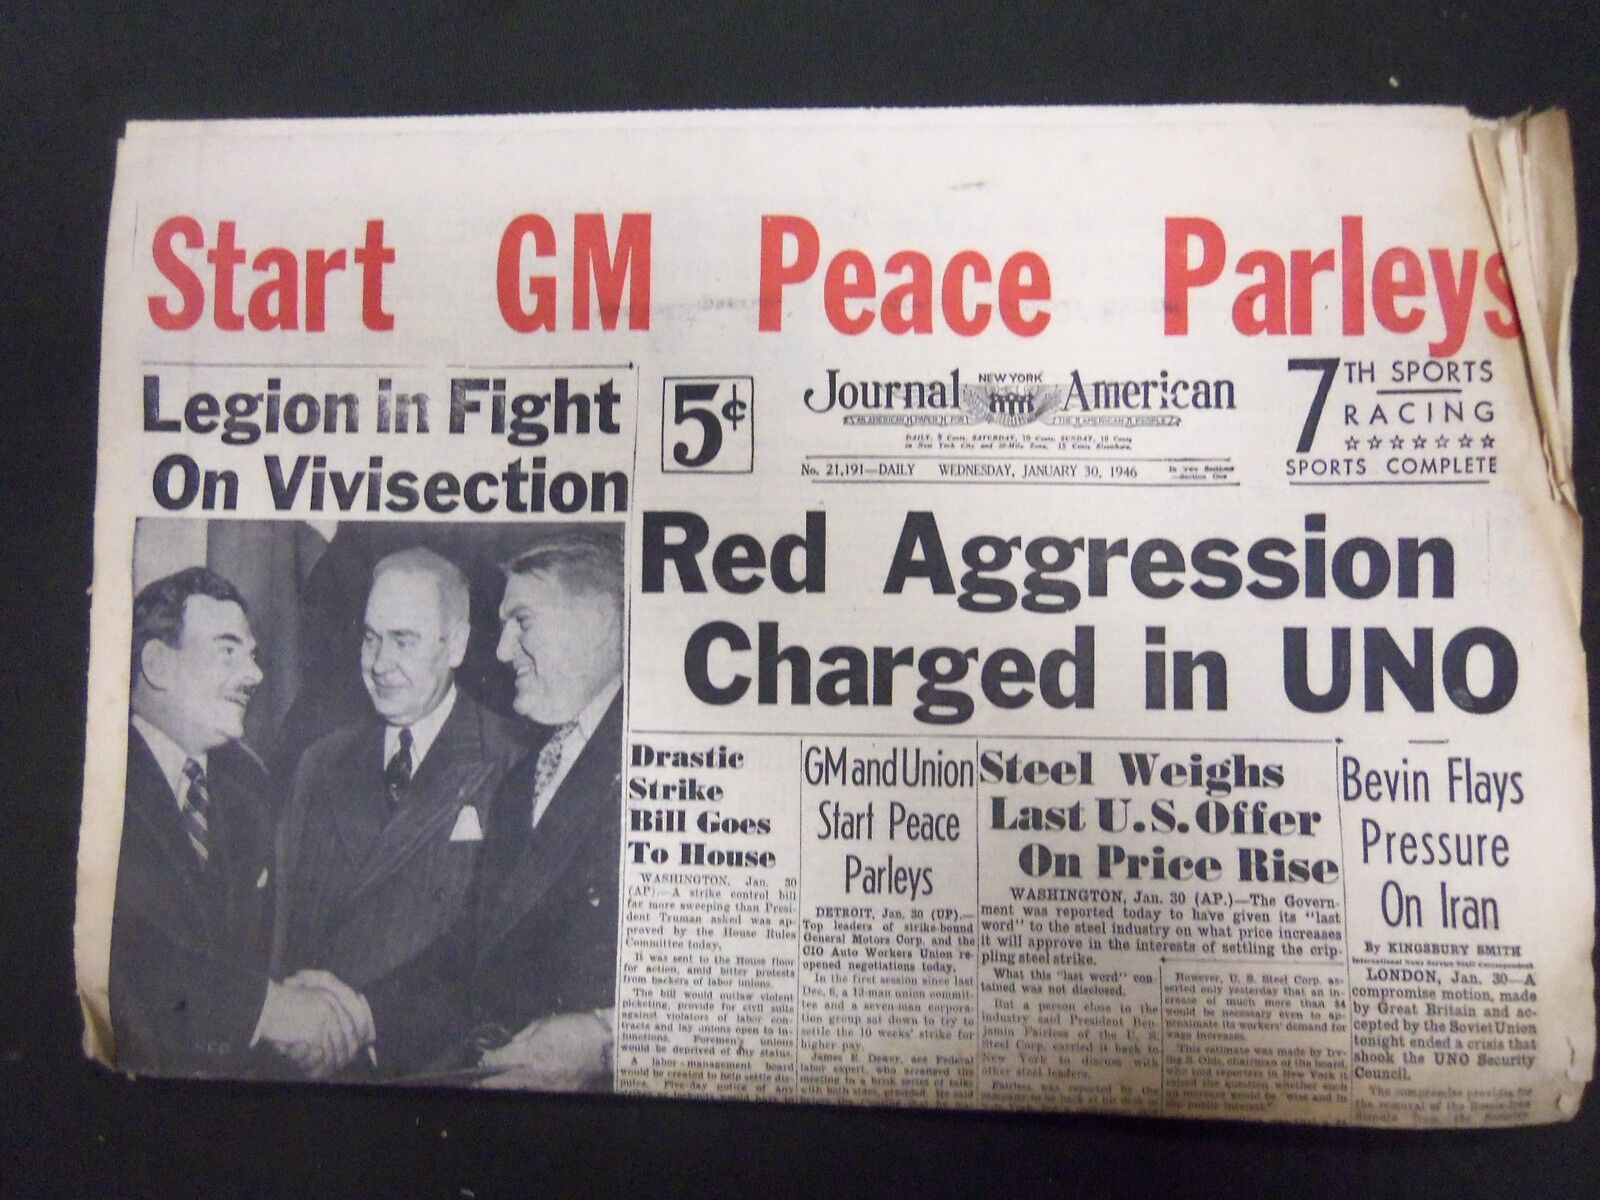 1946 JAN 30 NEW YORK JOURNAL AMERICAN - RED AGRESSION CHARGED IN UNO - NP 2307